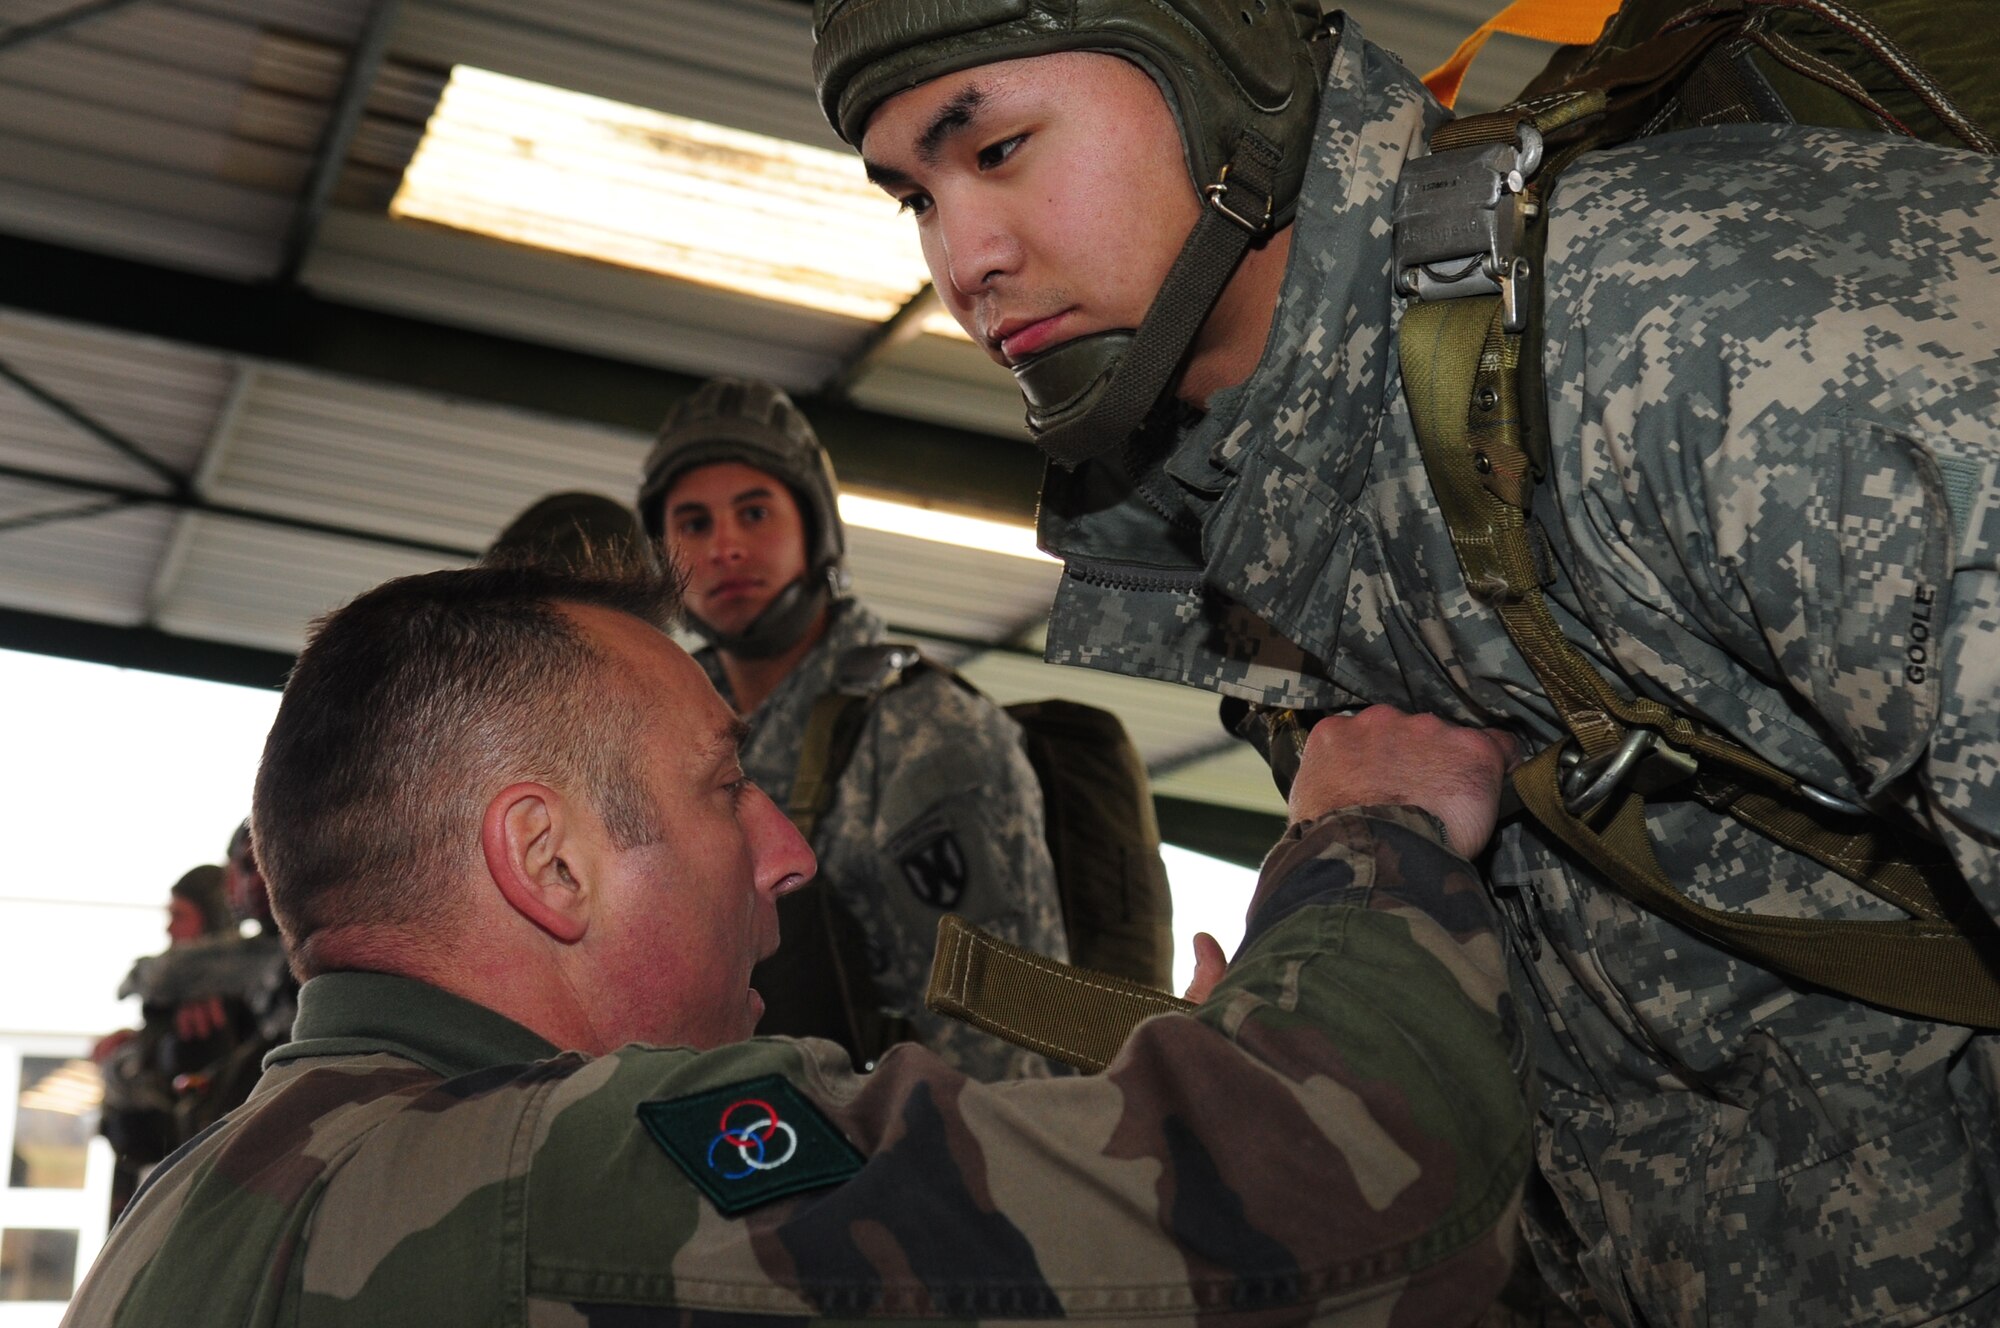 French Airborne Academy instructor Master Sgt. Stephane Paternotte inspects a French military parachute worn by U.S. Army Specialist Ryan Goole just before a multinational jump with U.S. and French military members, March 4, 2010.  Members of the 435th Contingency Response Group and the 5th Quartermaster Company joined with their French military counterparts for a week of training at the École des troupes aéroportées (ETAP), or School of Airborne Troops, a military school dedicated to training the military paratroopers   of the French army, located in the town of Pau, in the département  of Pyrénées-Atlantiques , France.  The ETAP is responsible for training paratroopers, and for international cooperation and promotion of paratroop culture. (U.S. Air Force Photo by Staff Sgt. Jocelyn Rich)